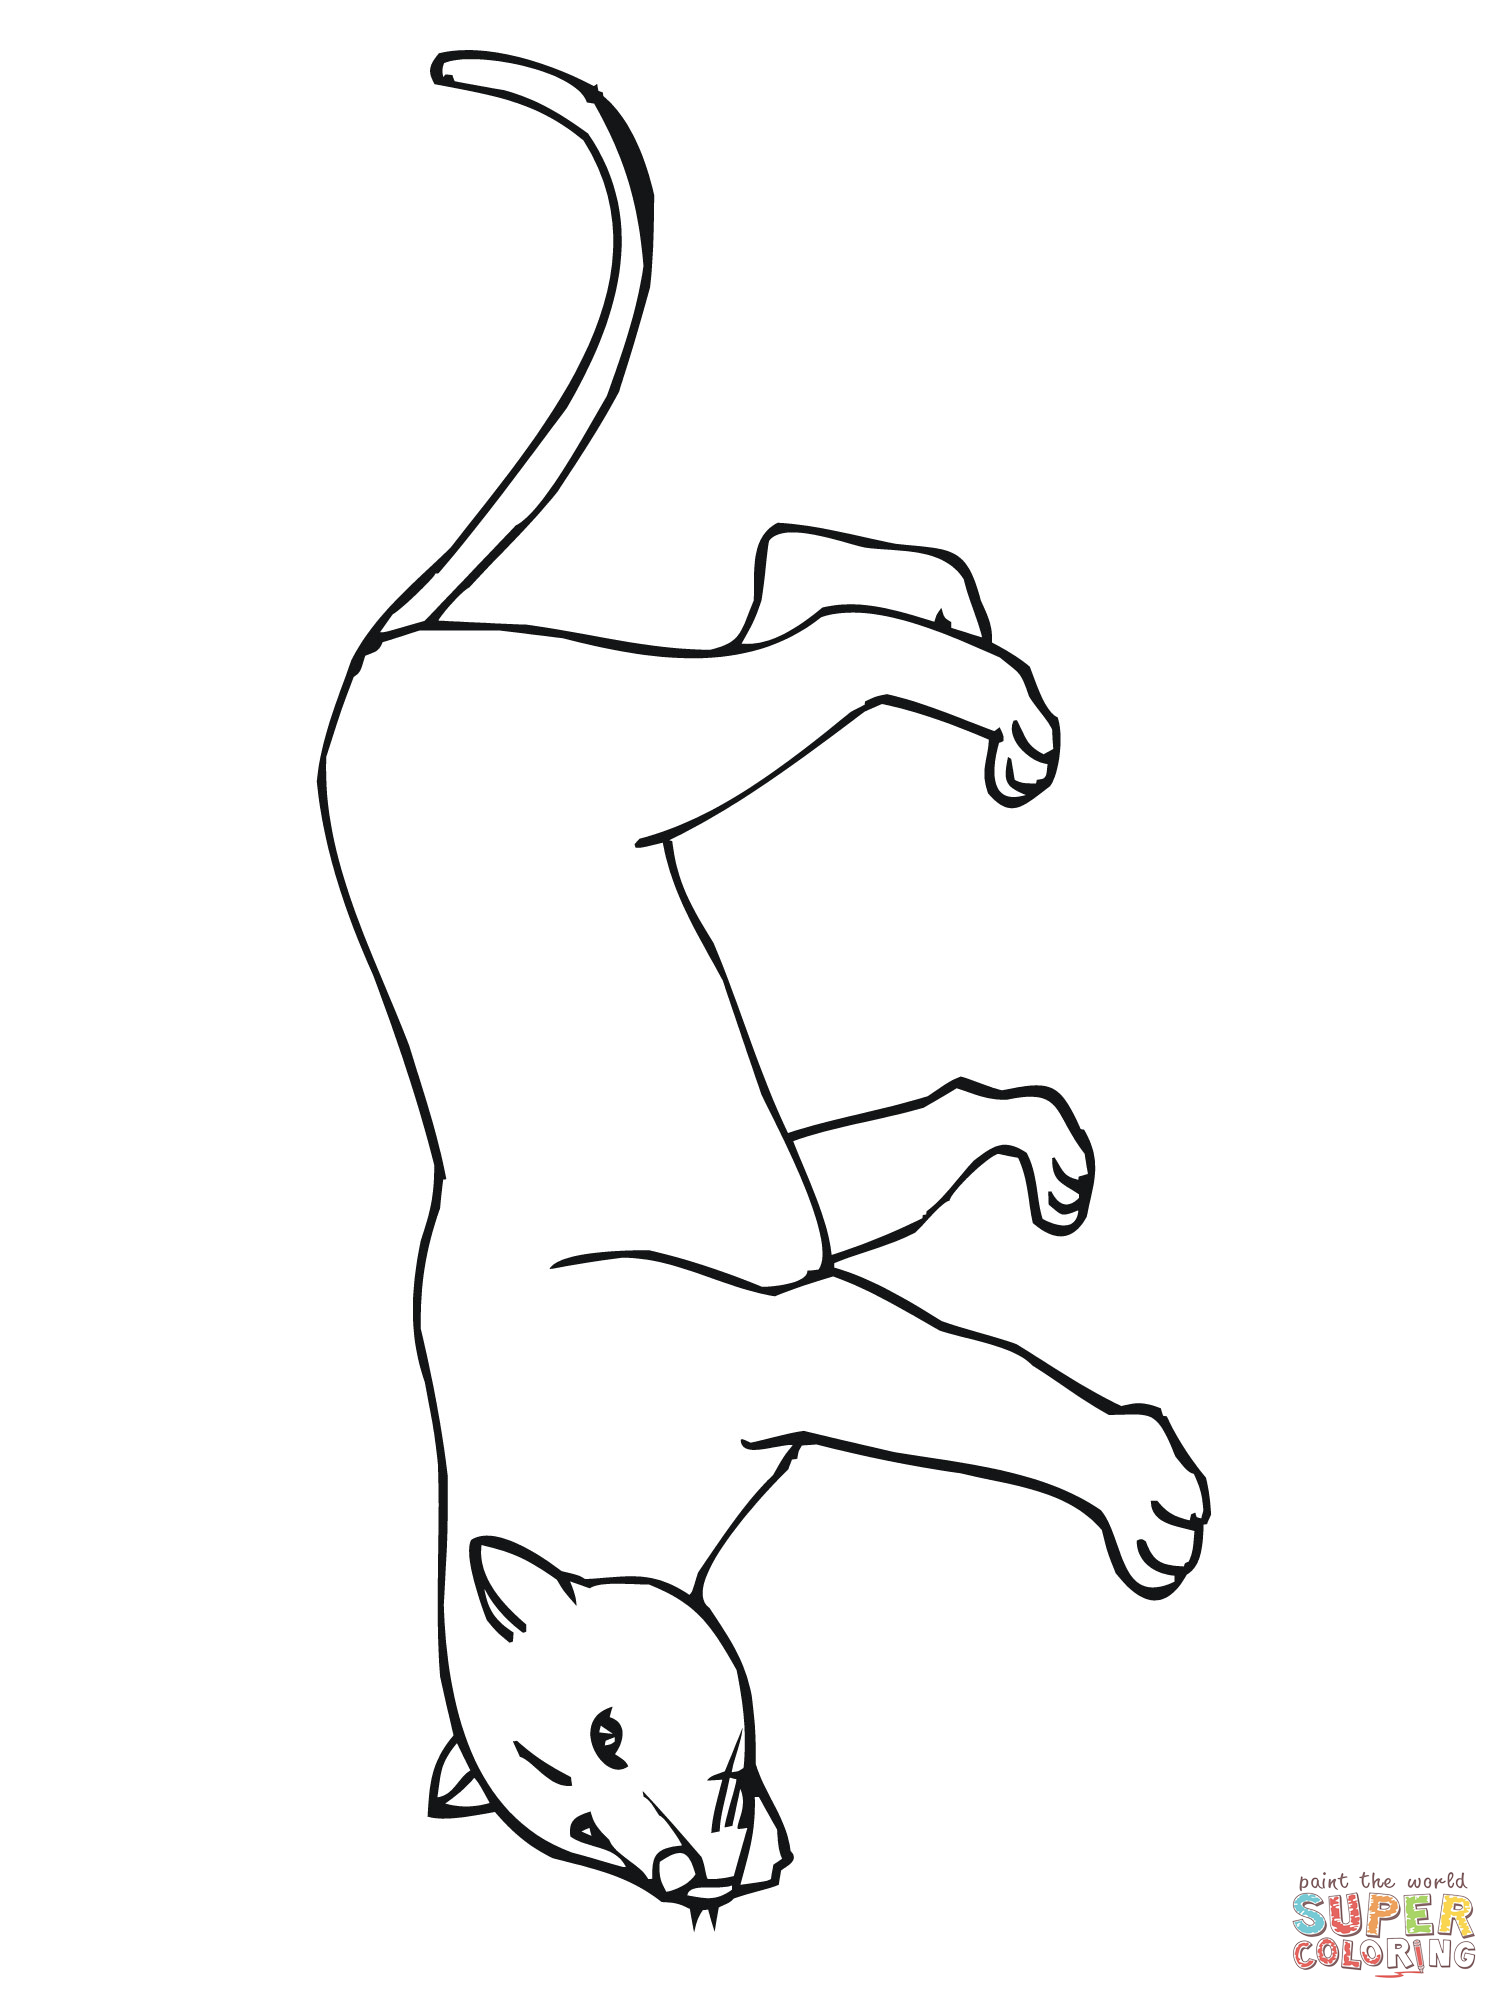  Panther Animal Coloring Pages kids coloring pages | #12